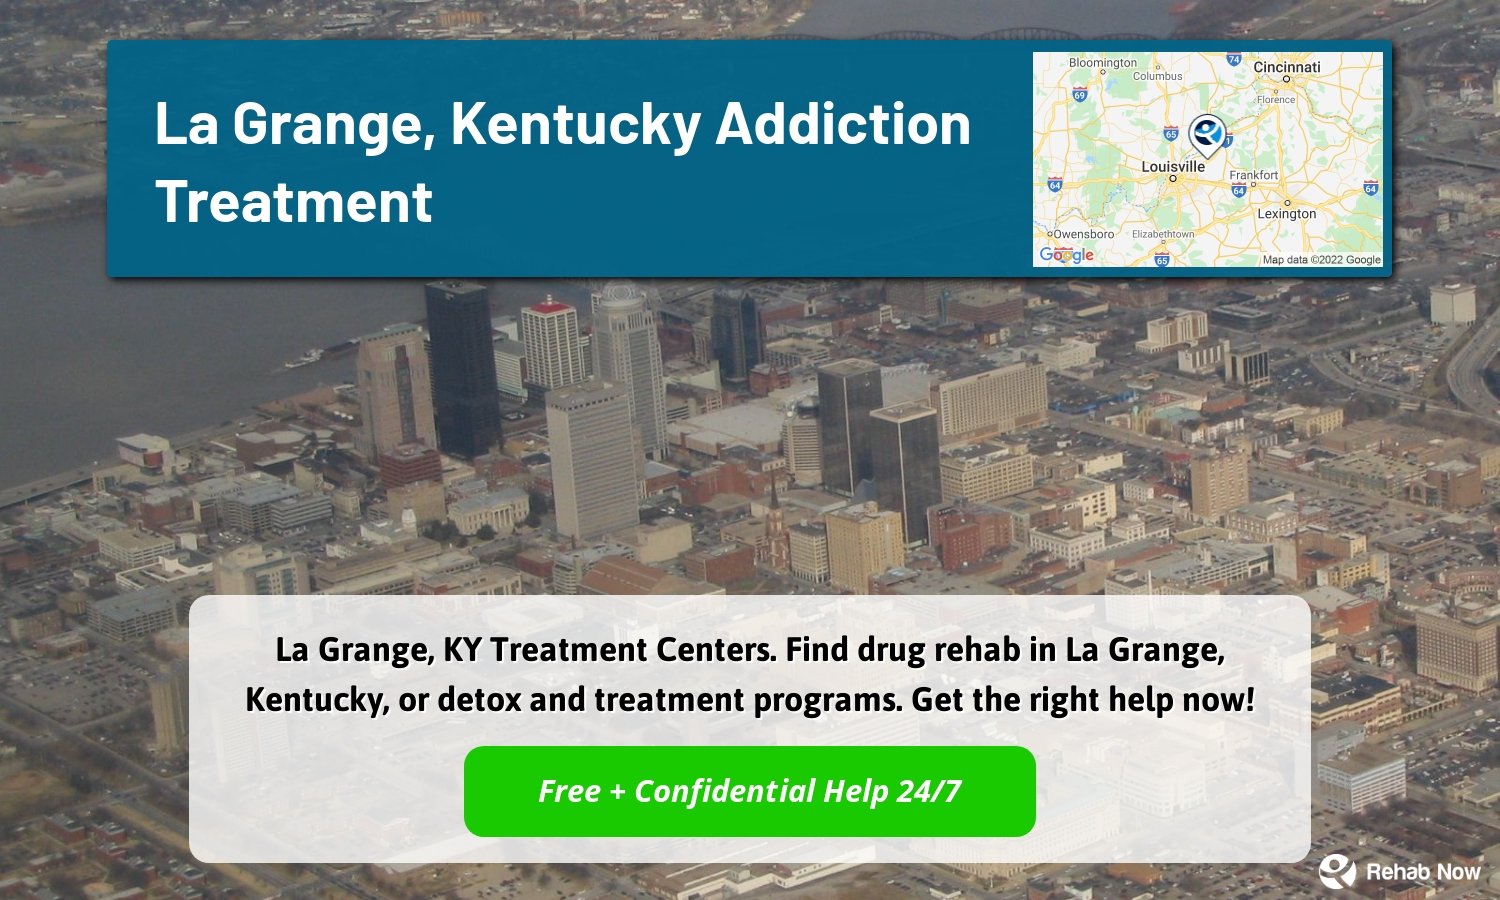 La Grange, KY Treatment Centers. Find drug rehab in La Grange, Kentucky, or detox and treatment programs. Get the right help now!